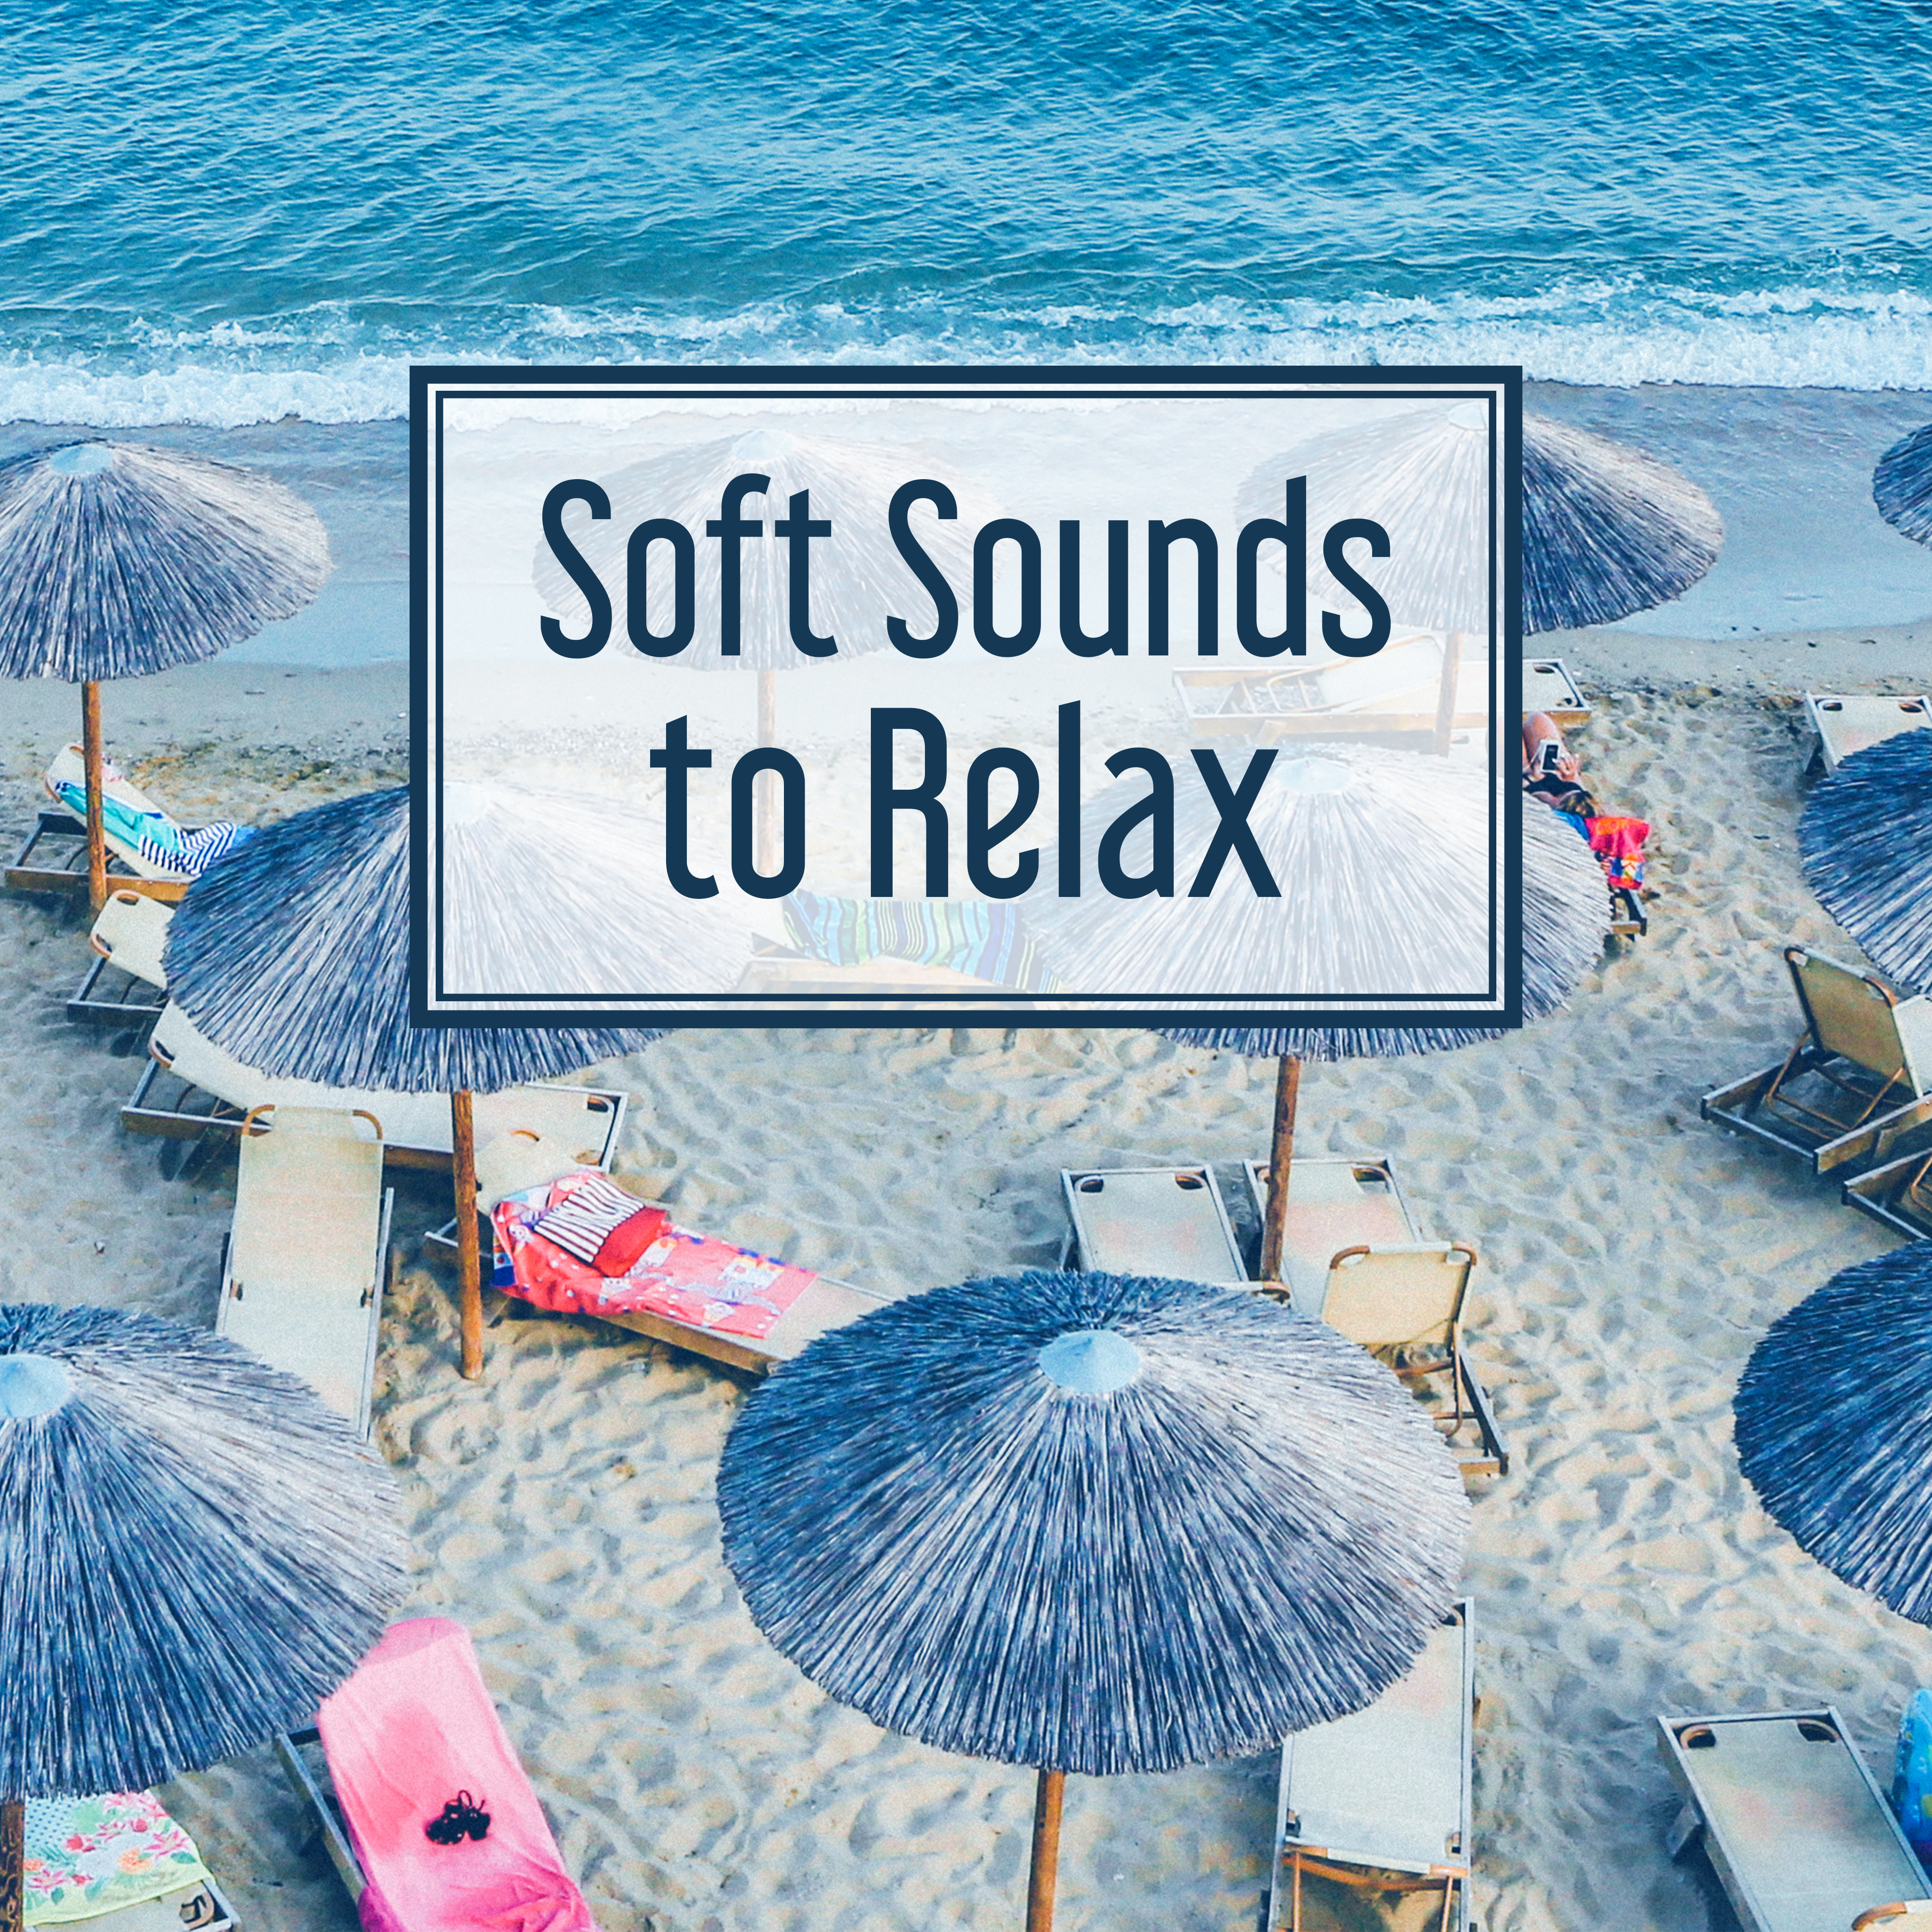 Soft Sounds to Relax – Easy Listening, New Age to Rest, Music to Help You Relax